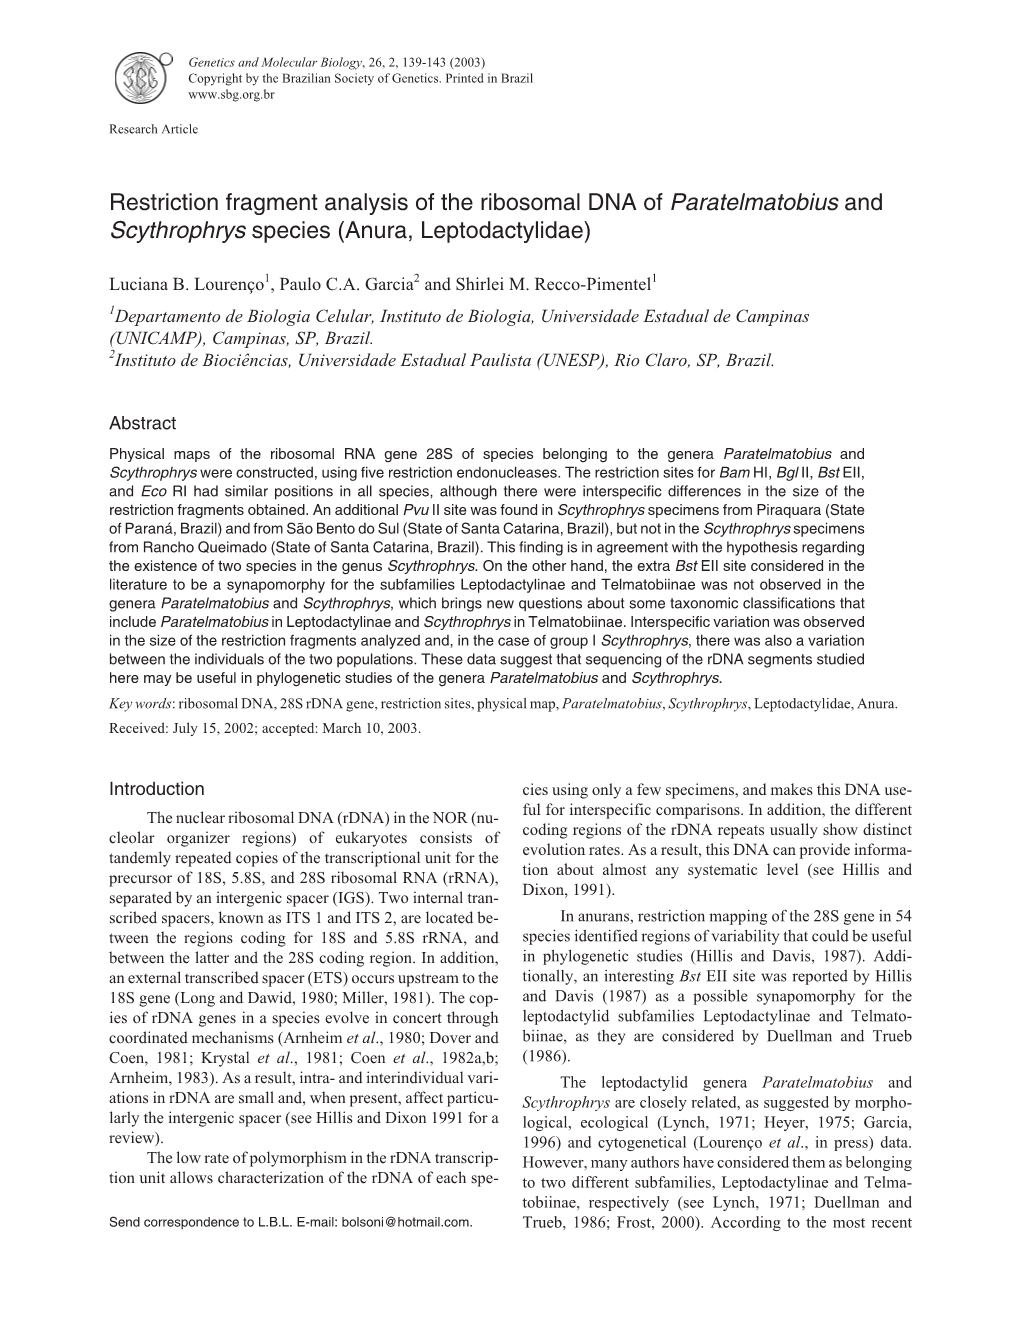 Restriction Fragment Analysis of the Ribosomal DNA of Paratelmatobius and Scythrophrys Species (Anura, Leptodactylidae)